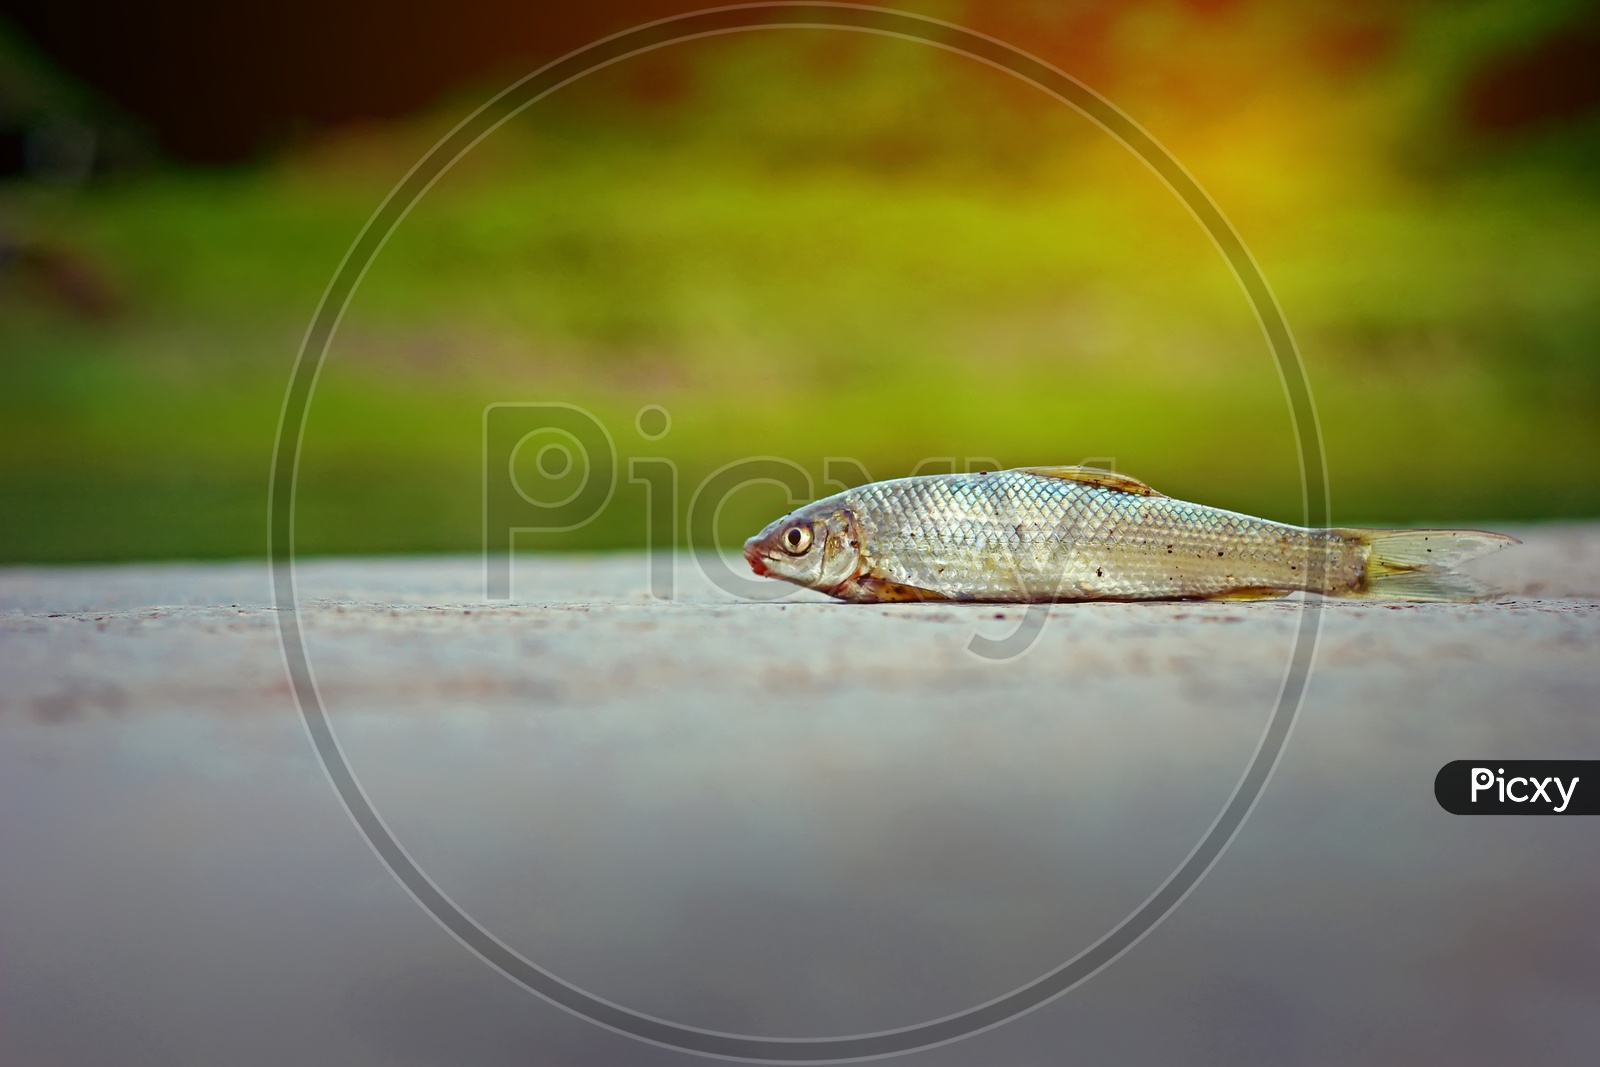 A  fish on land with green background